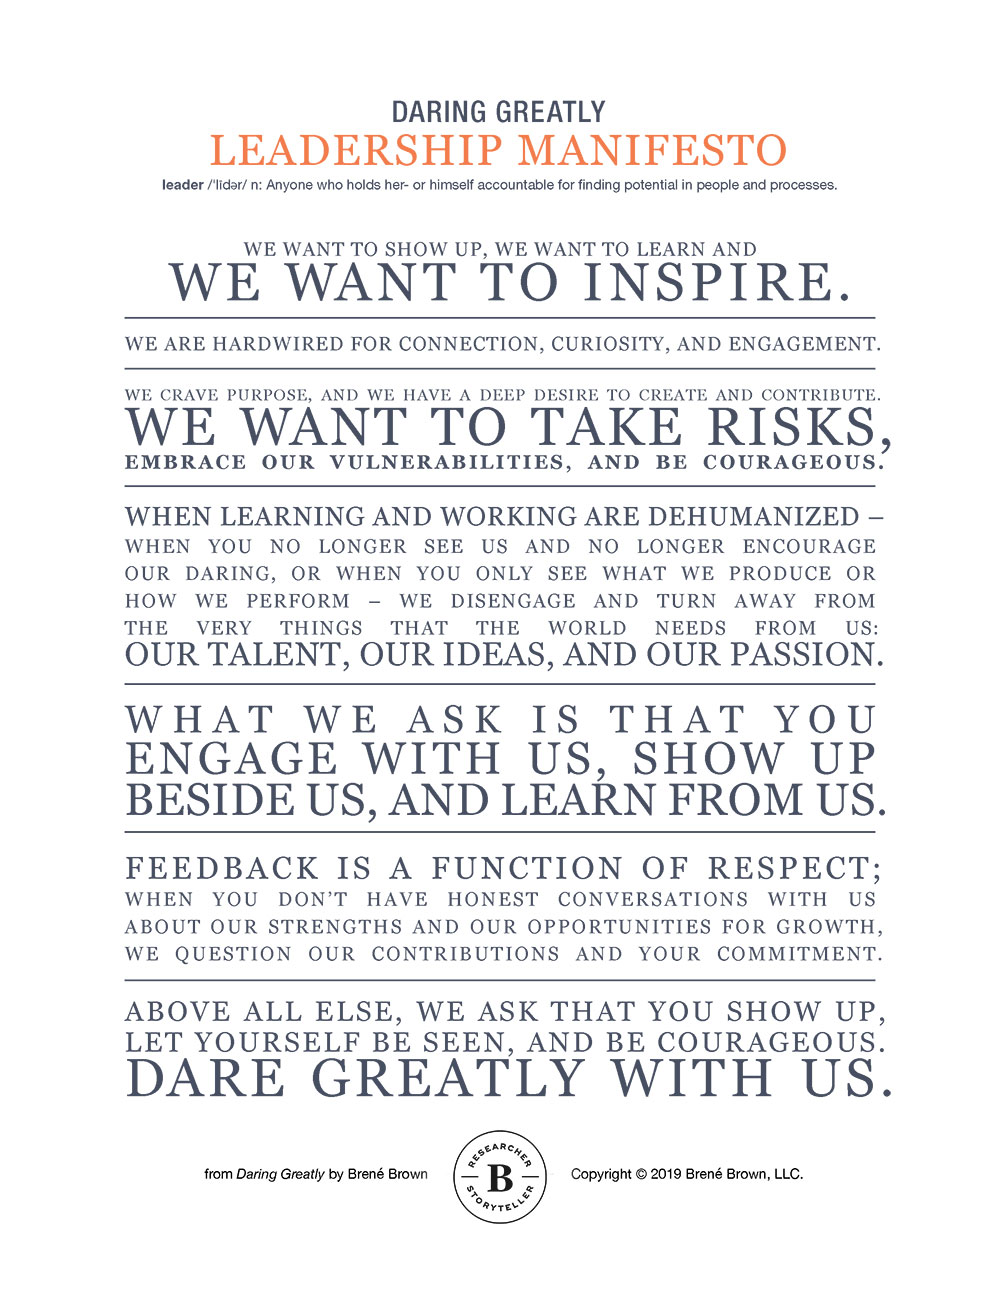 We want to show up, we want to learn and we want to inspire. We are hardwired for connection, curiosity, and engagement. We crave purpose, and we have a deep desire to create and contribute. We want to take risks, embrace our vulnerabilities, and be courageous. When learning and working are dehumanized – when you no longer see us and no longer encourage our daring, or when you only see what we produce or how we perform – we disengage and turn away from the very things that the world needs from us: our talent, our ideas, and our passion.